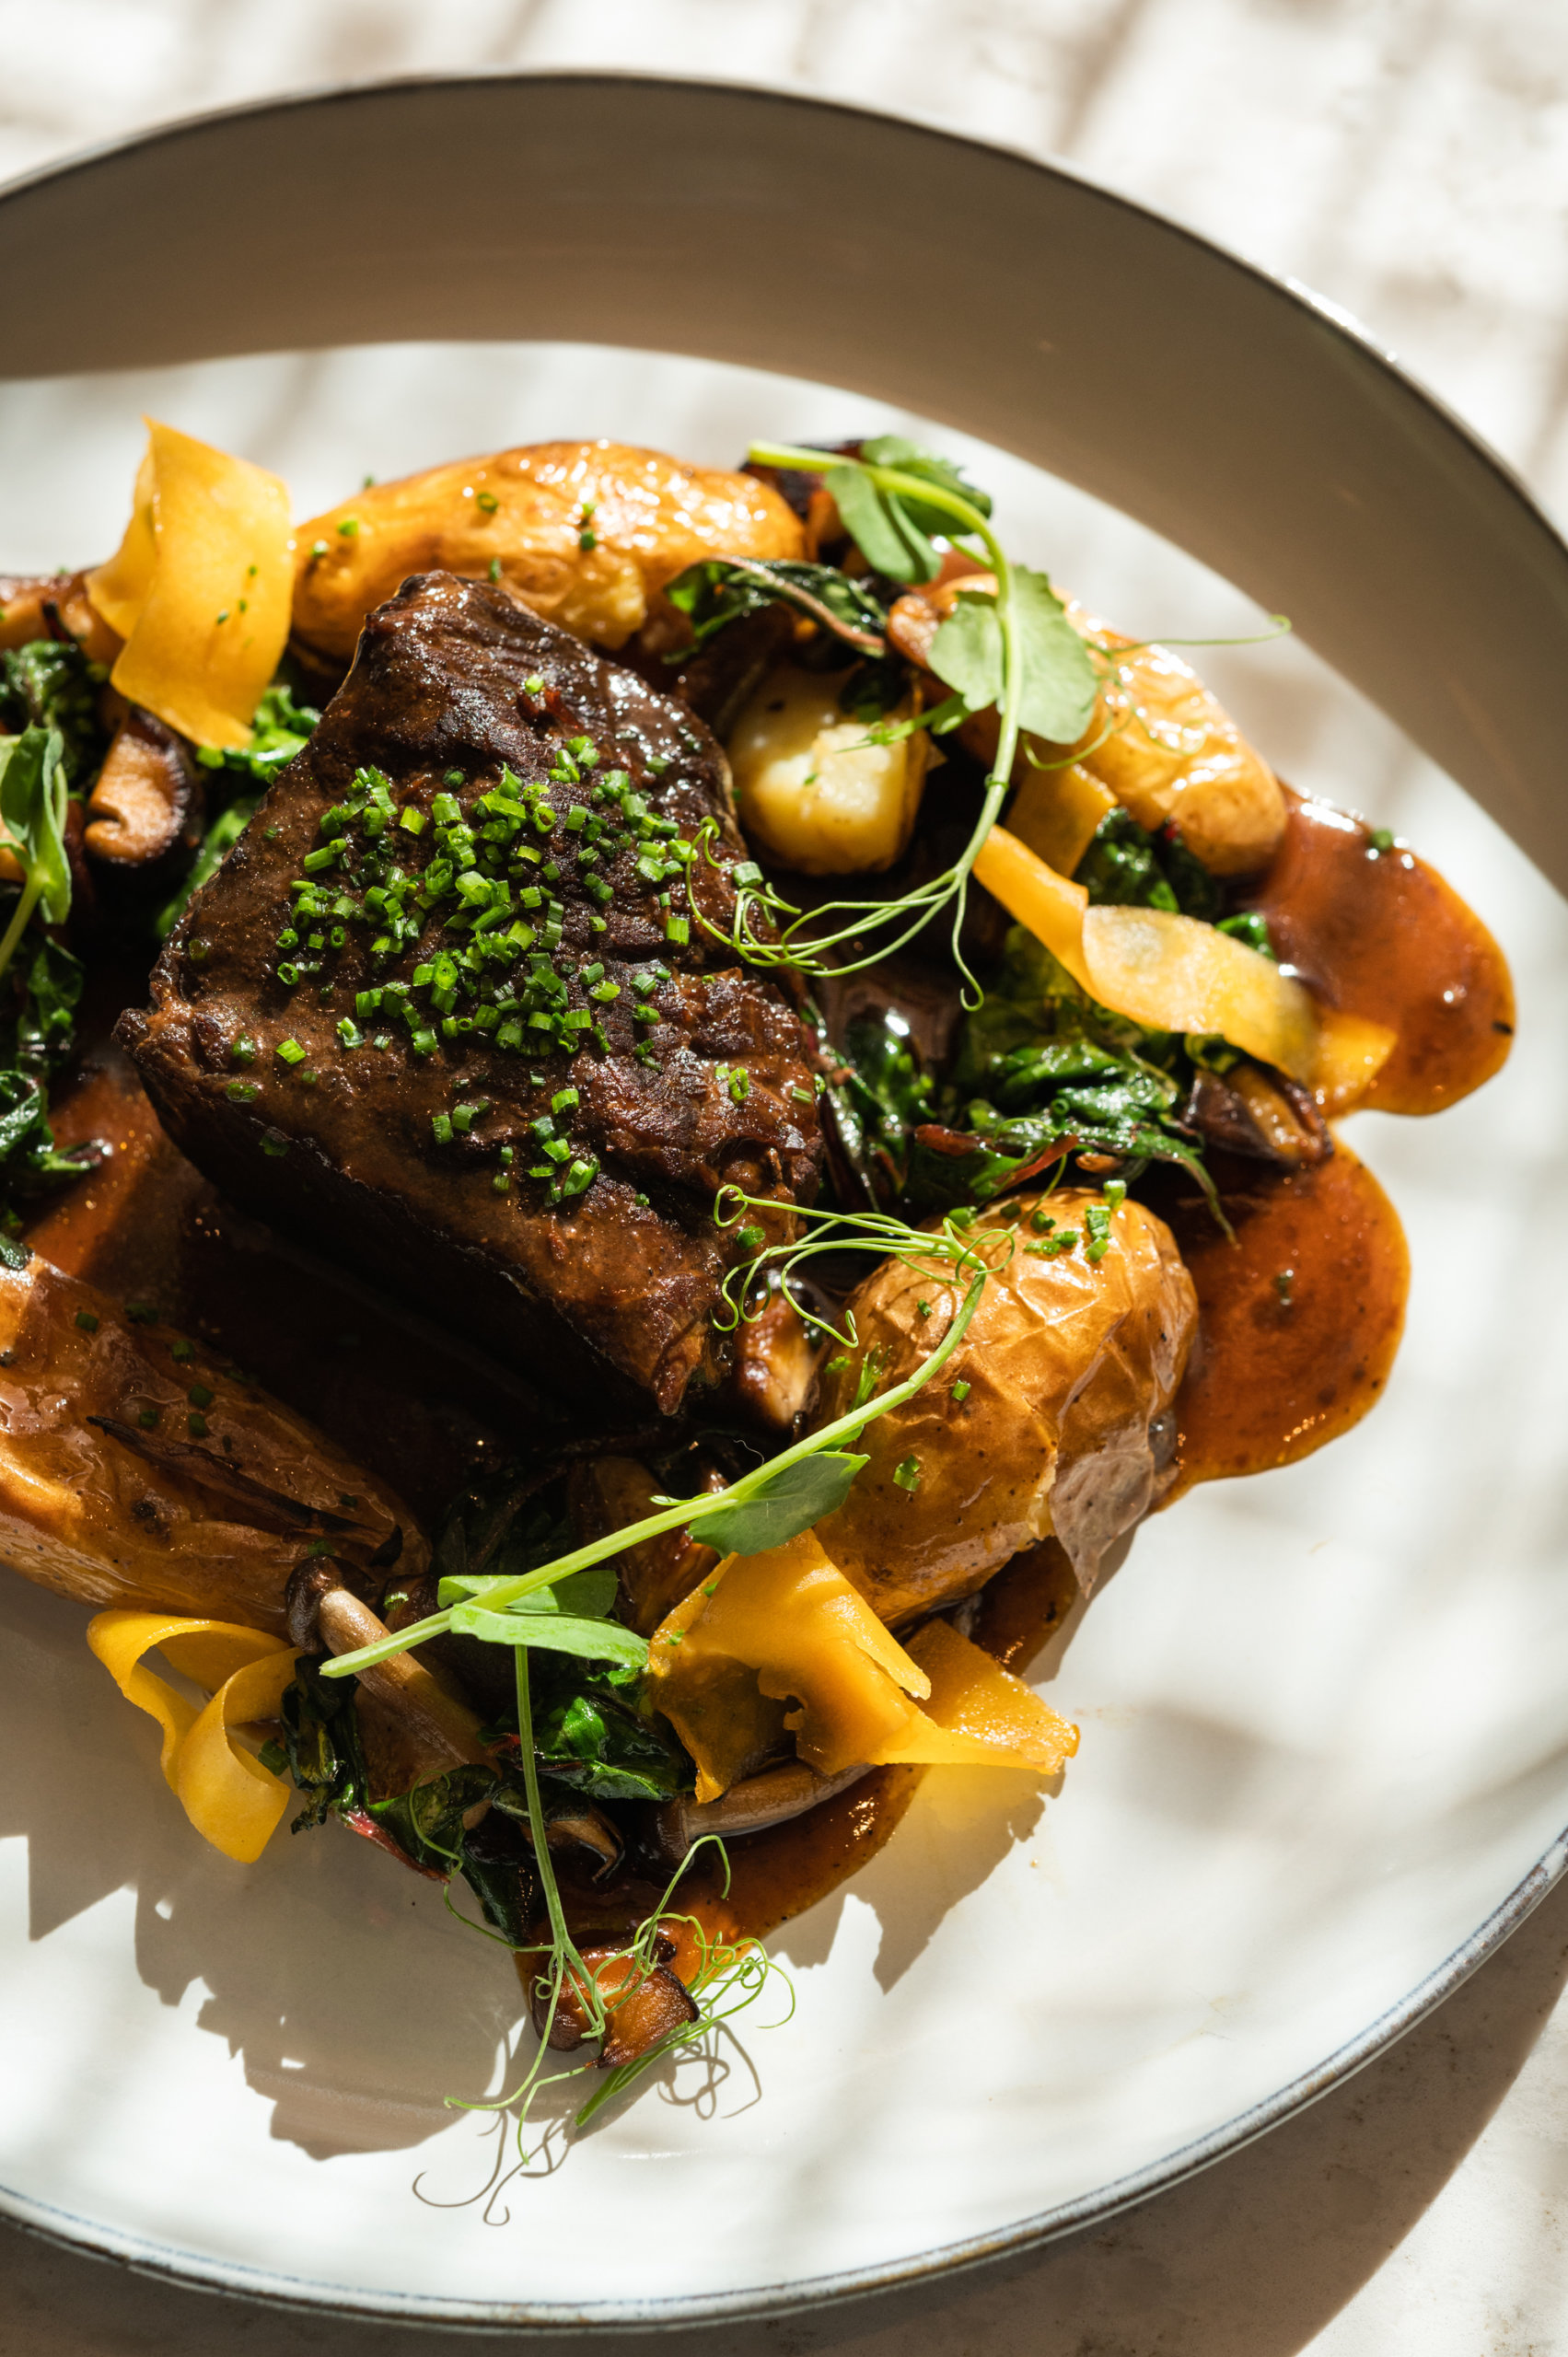 Short rib with potatoes and chives